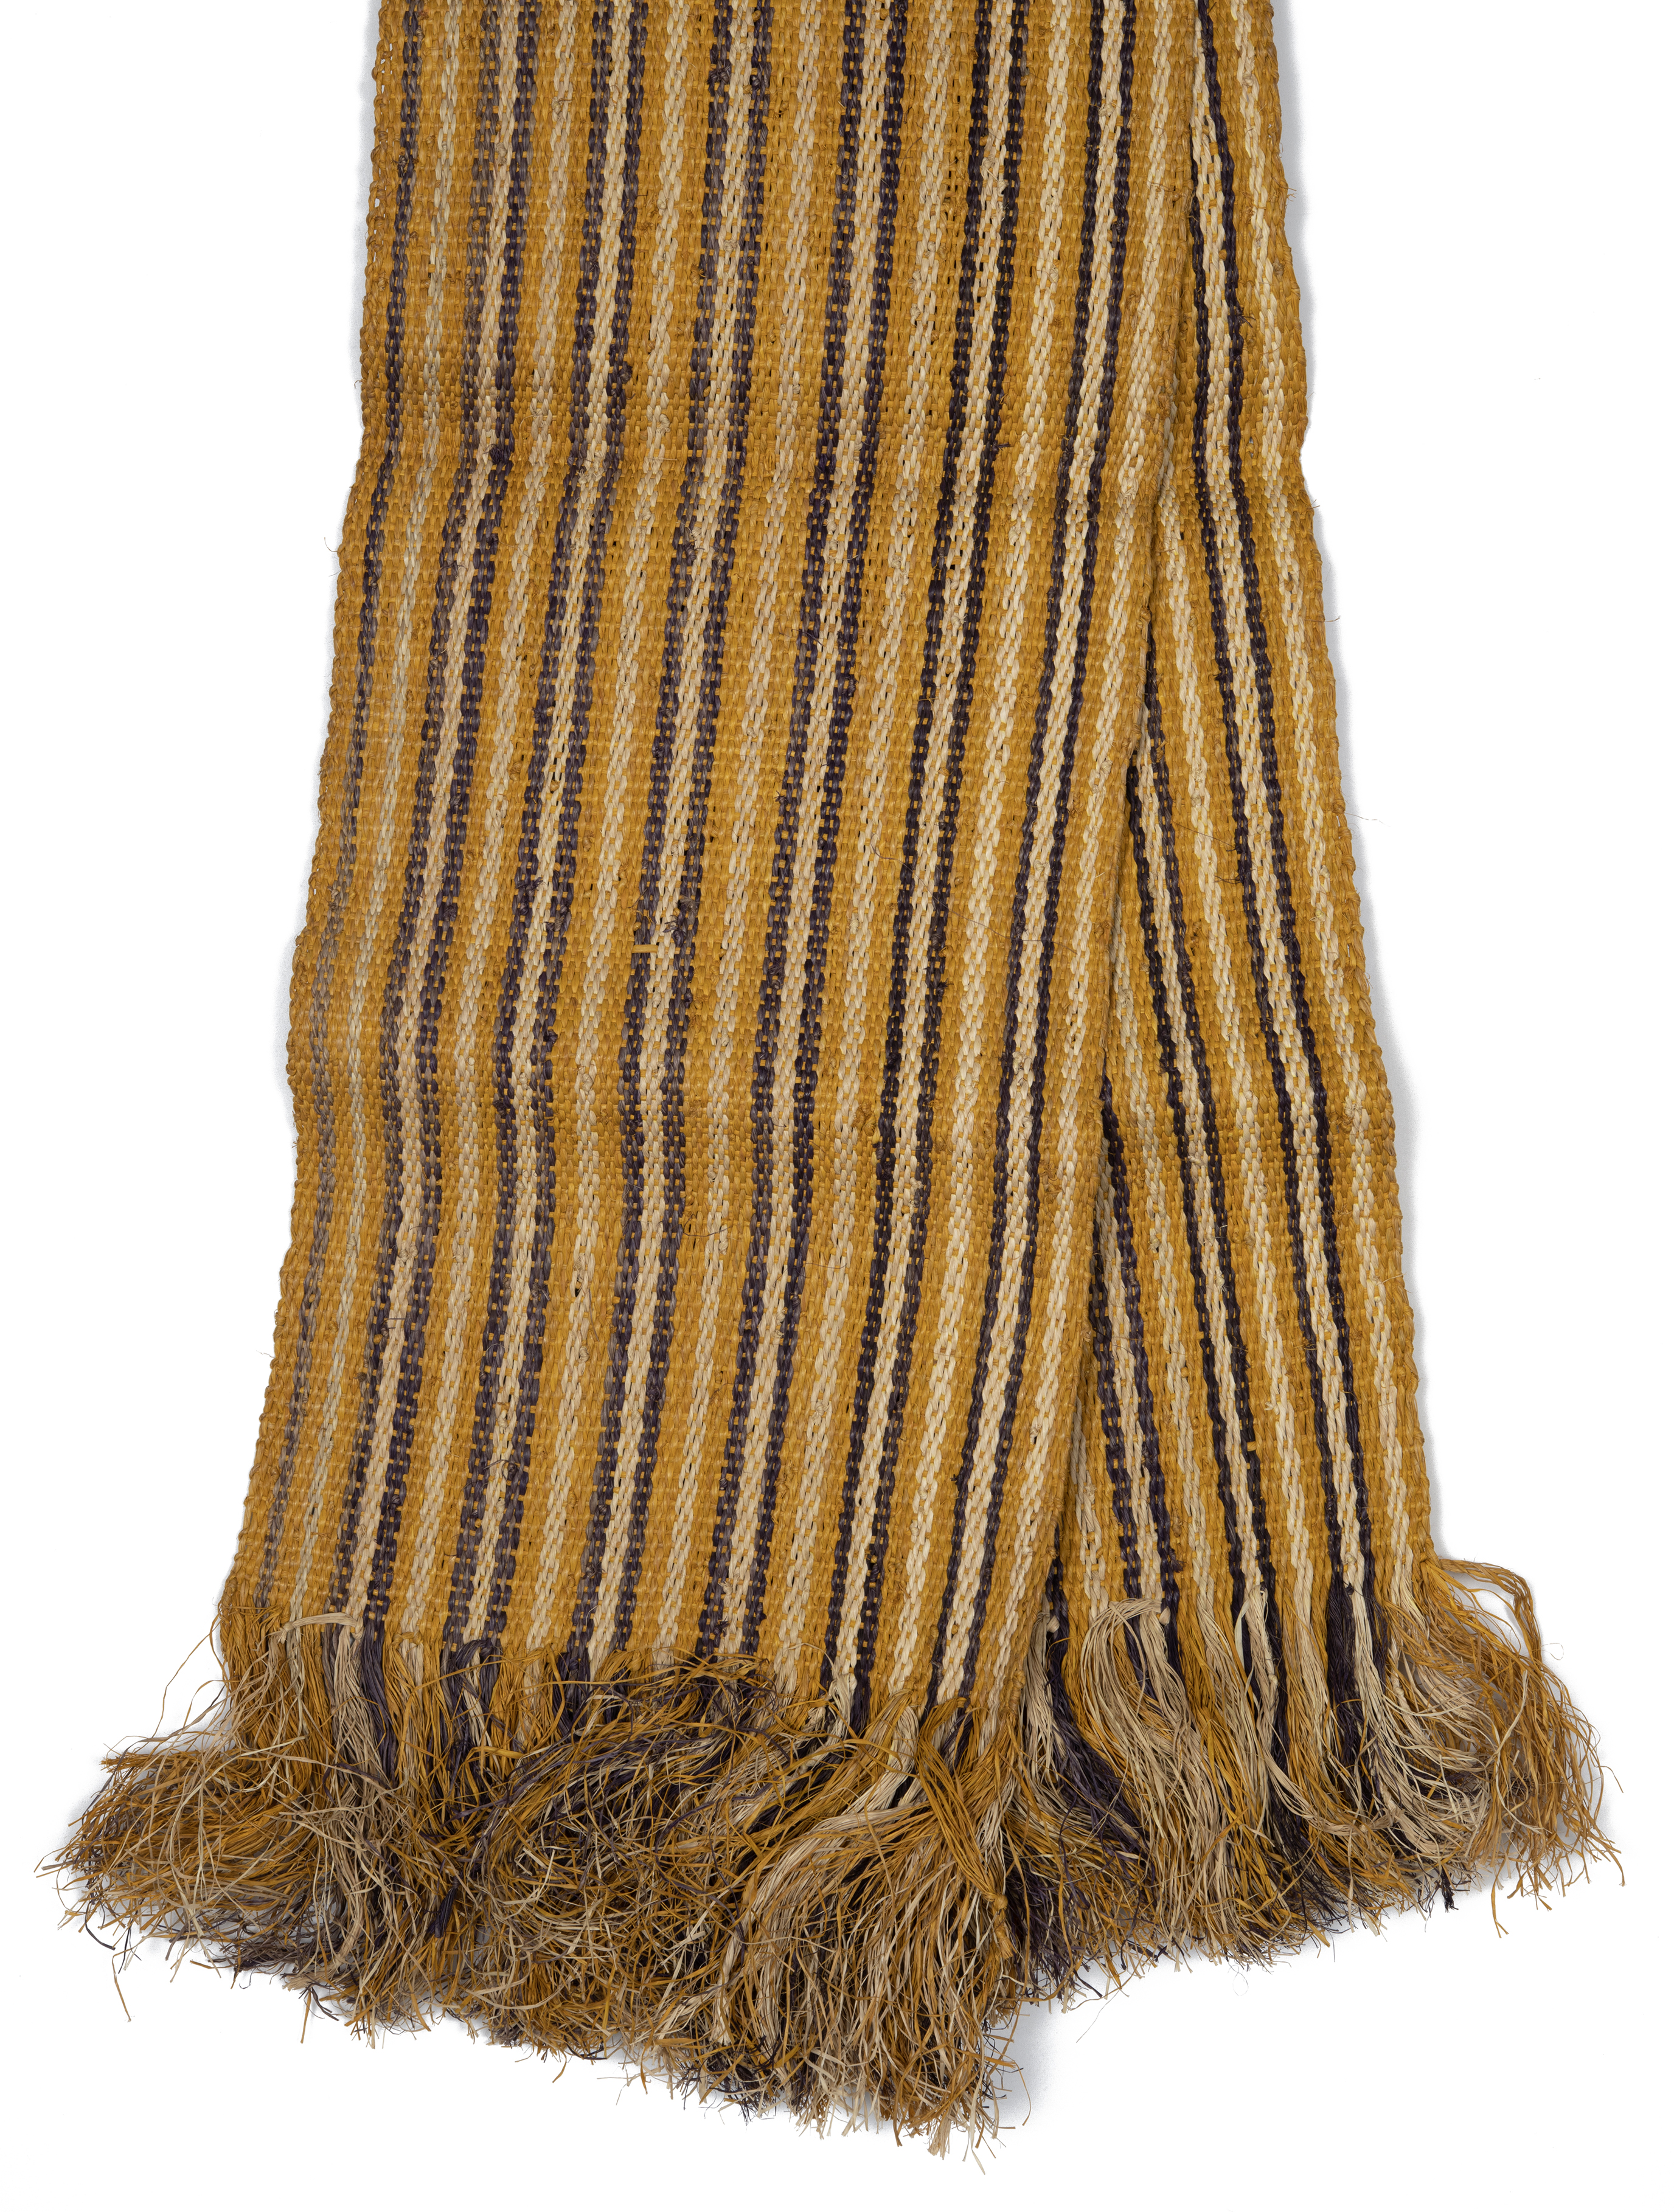 Terfo cloth, woven from palm fiber by a Sobei weaver from Papua